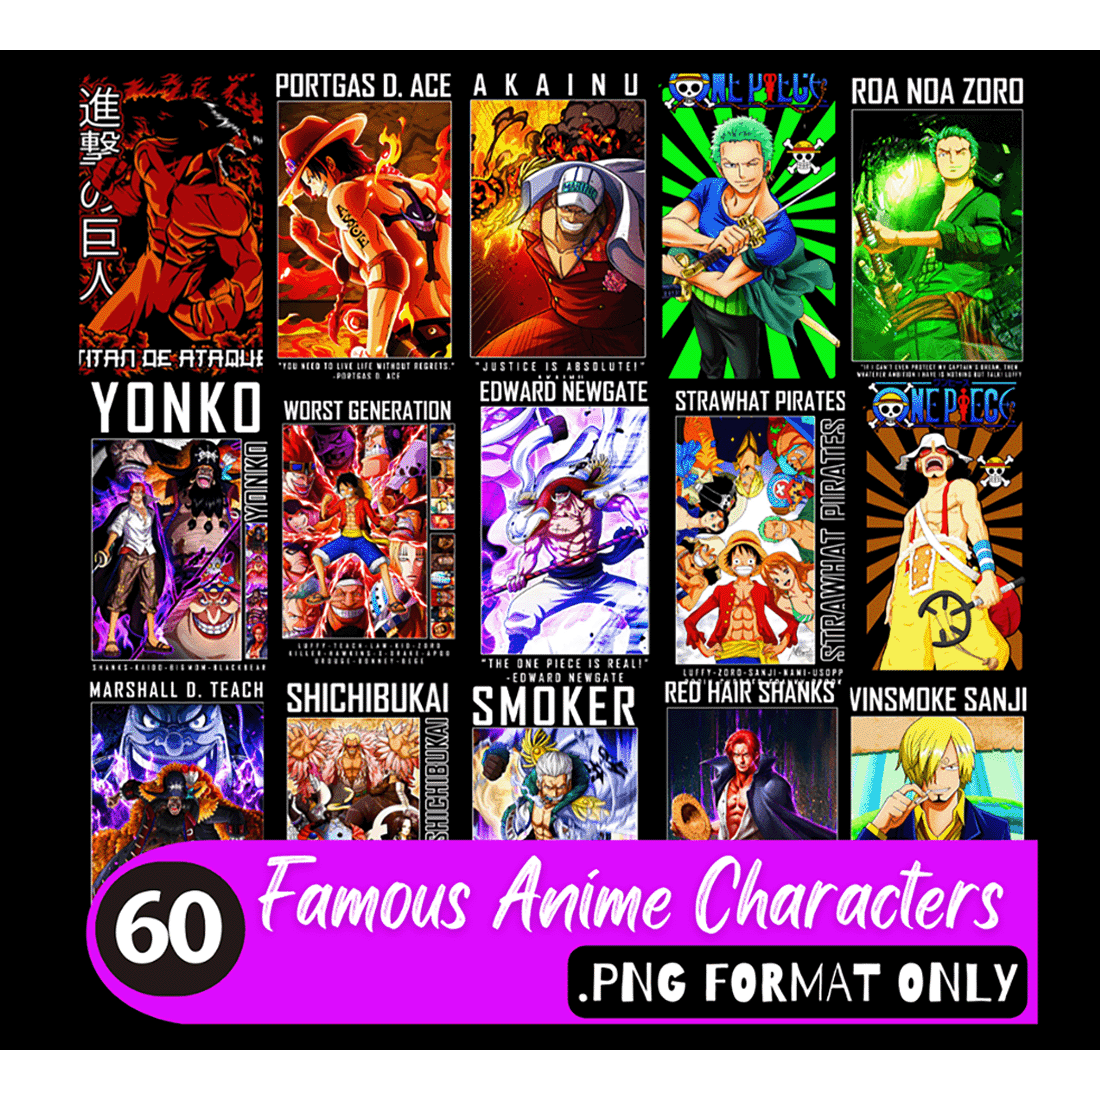 Poster of famous anime characters.